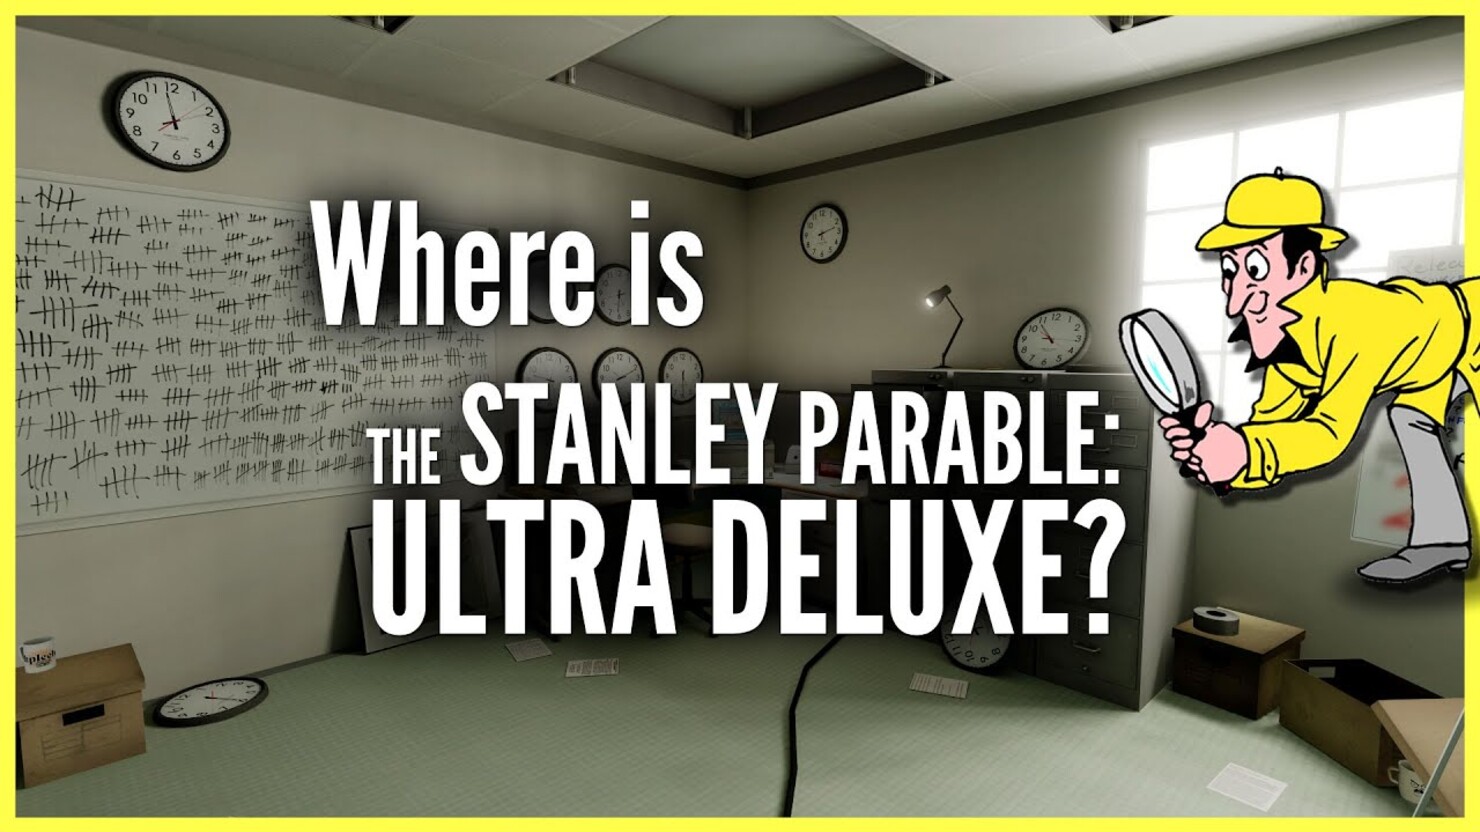 Parable ultra deluxe. Stanley Parable Ultra Deluxe Стэнли. The Stanley Parable: Ultra Deluxe. The Stanley Parable на андроид. The Stanley Parable Ultra Deluxe v.1.05 (2022).